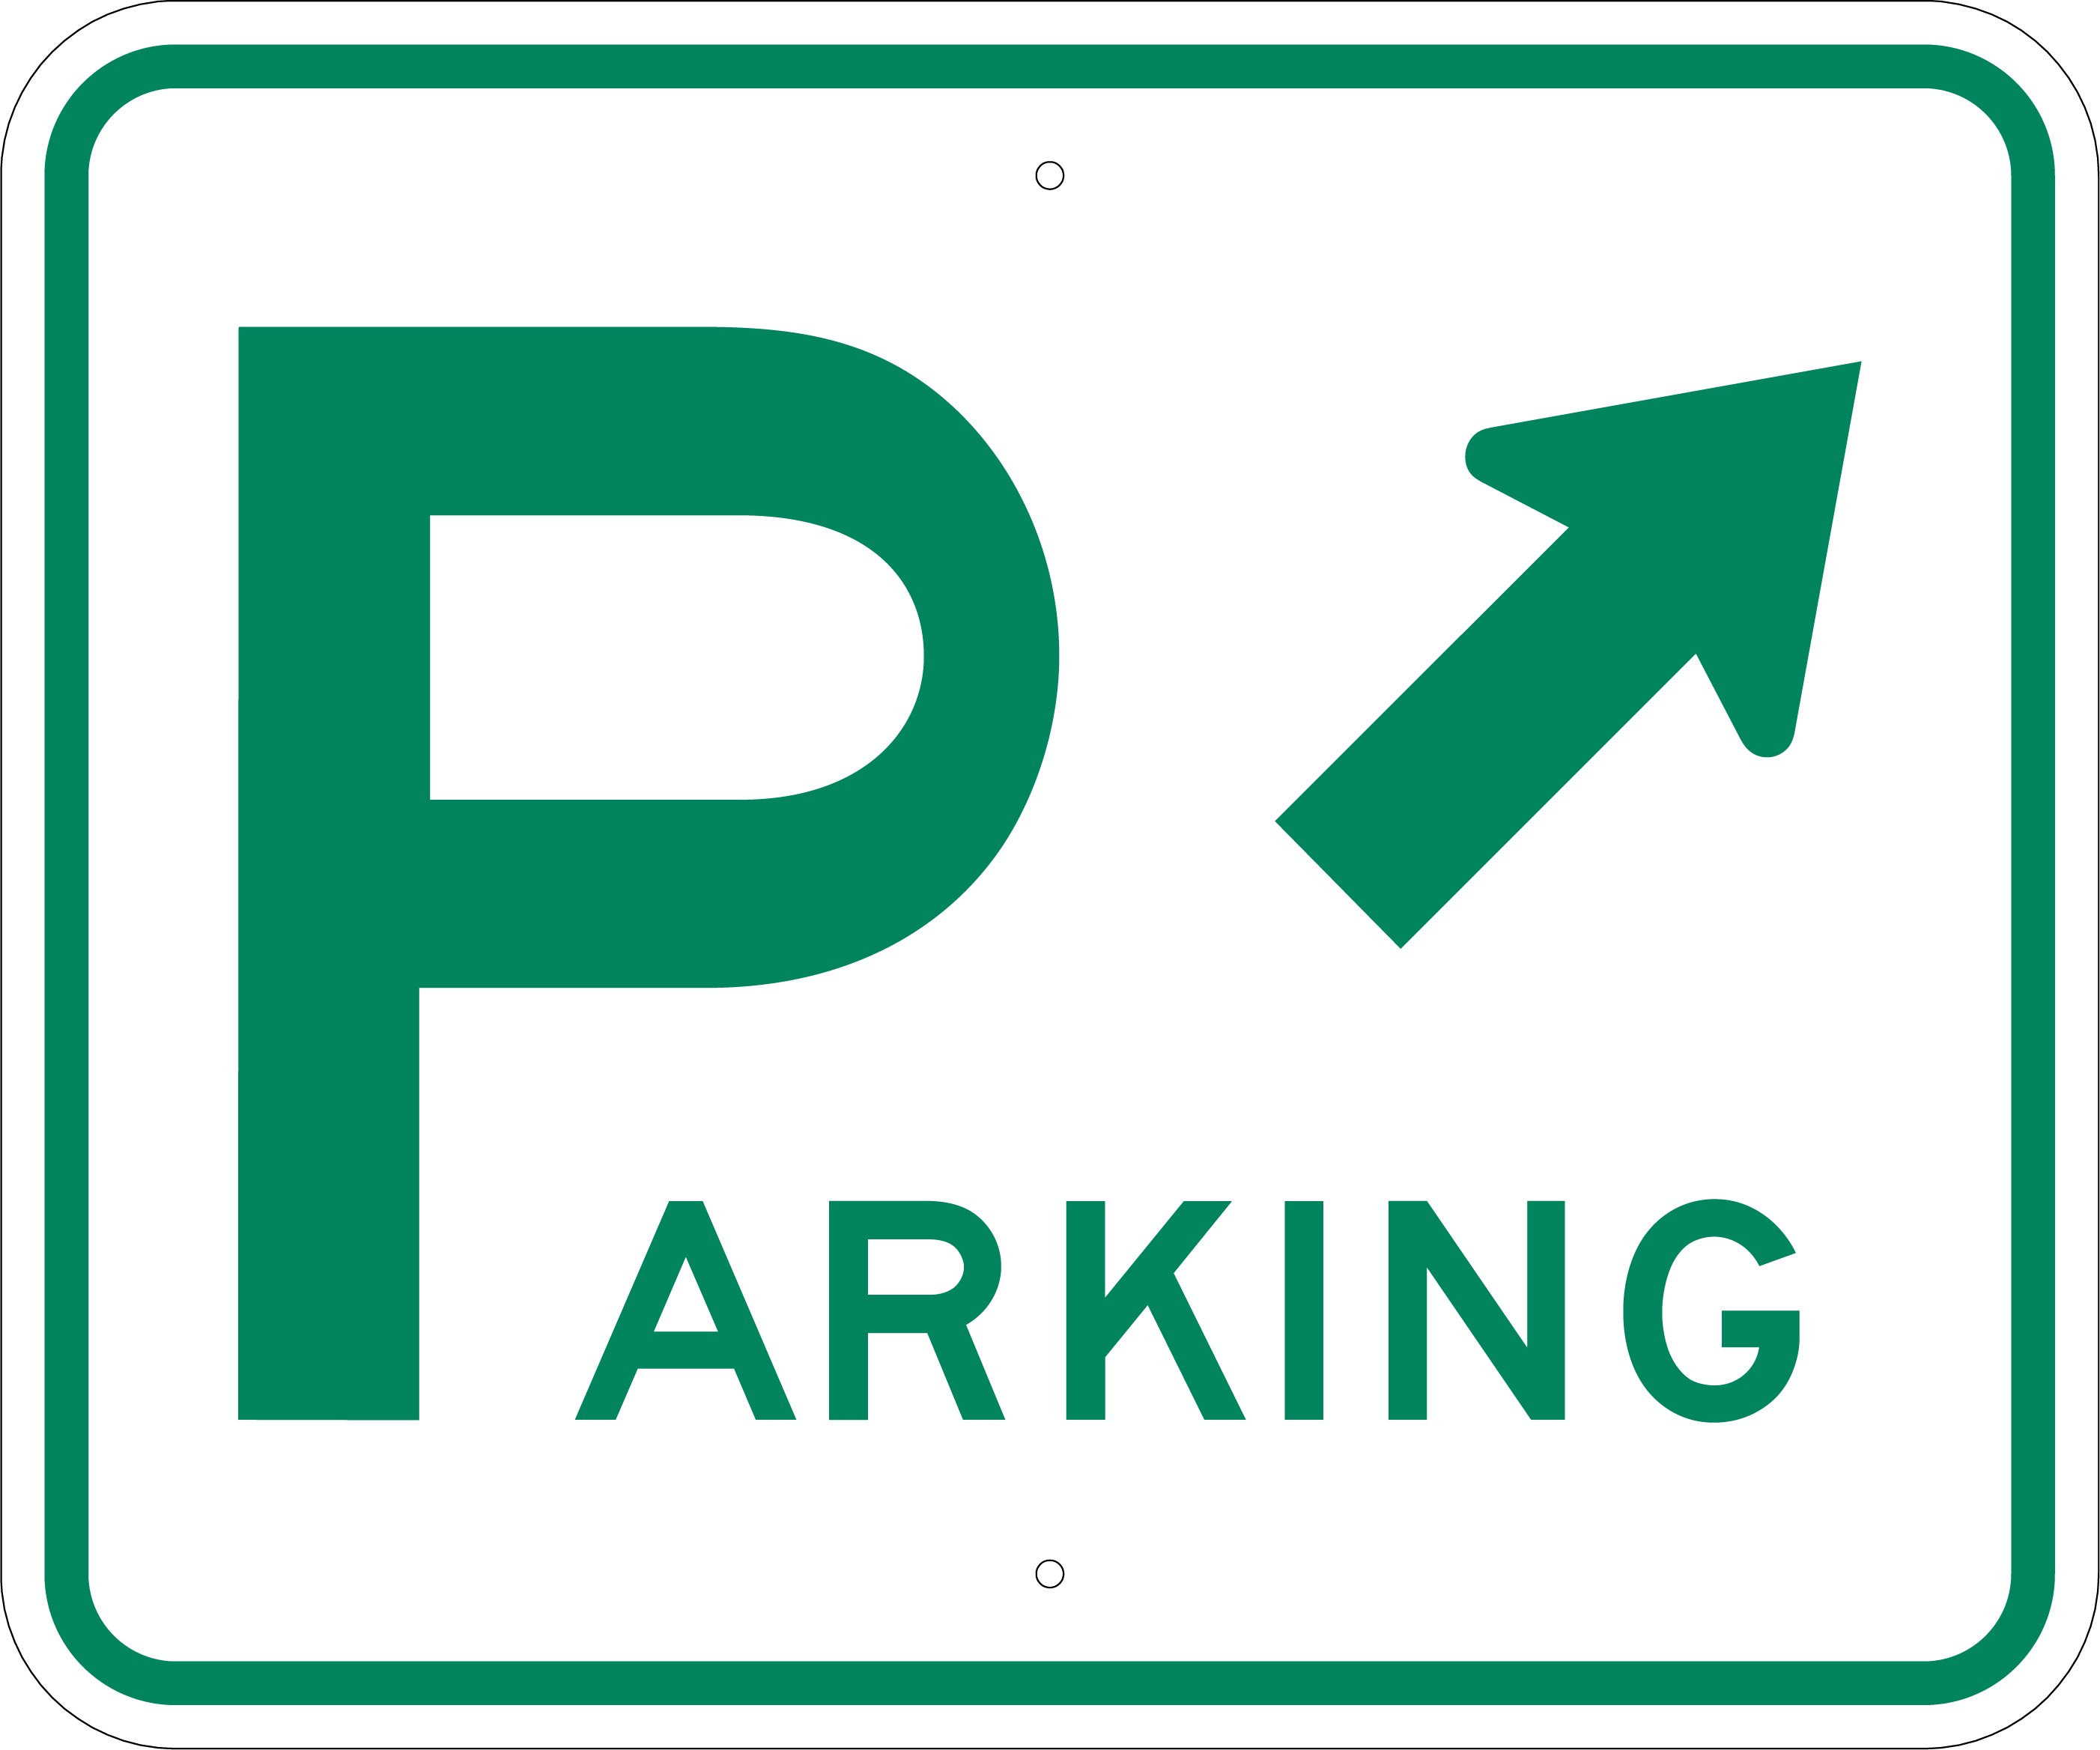 Parking Symbol Clipart Picture Parking Symbol Gif Png Icon Image ...